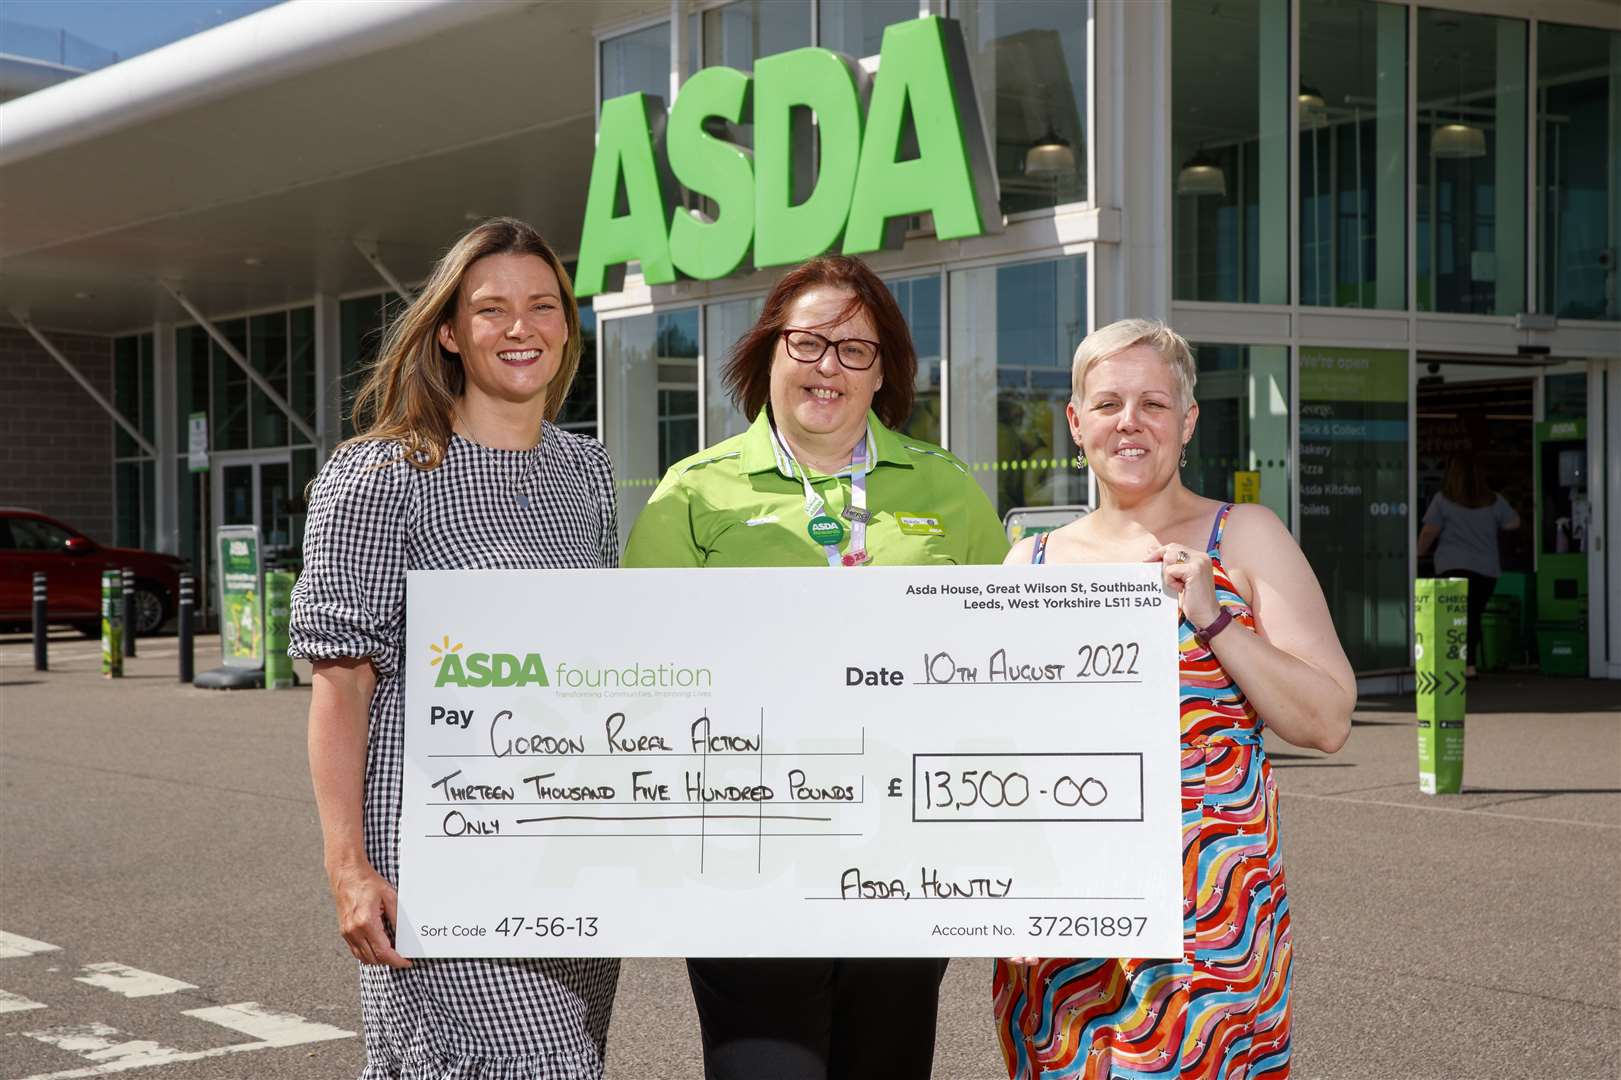 Laura McNeill, fundraiser at Gordon Rural Action, Michelle Gunn, Asda Huntly Community Champion and Emma Selway-Grant, chief officer at Gordon Rural Action.